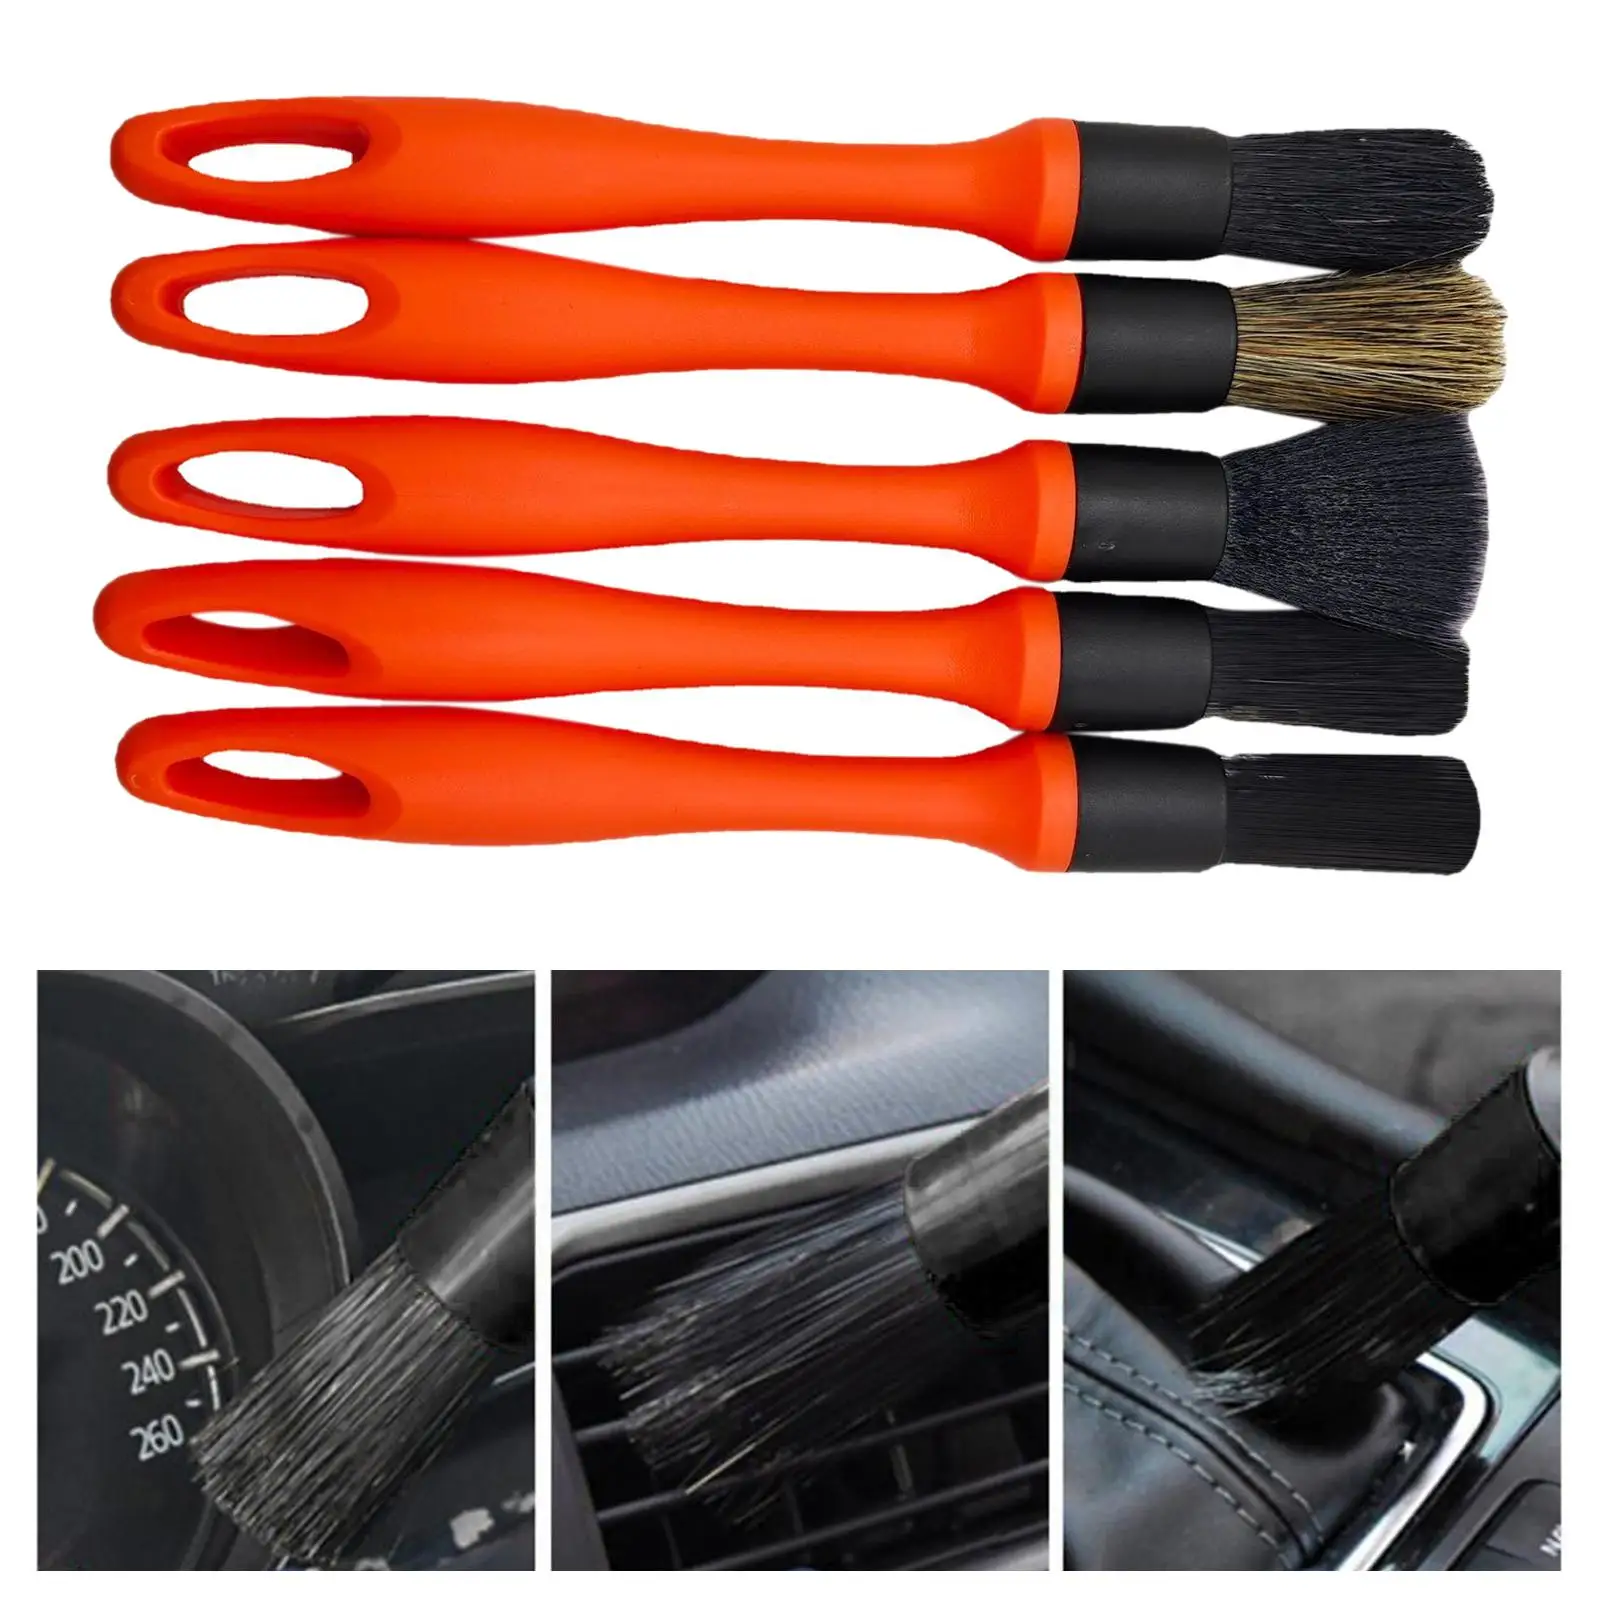 5 Pieces Car Interior Cleaning Brush Comfortable Grip Dust Removal Brush for Console Truck Interior Air Conditioner SUV Exterior